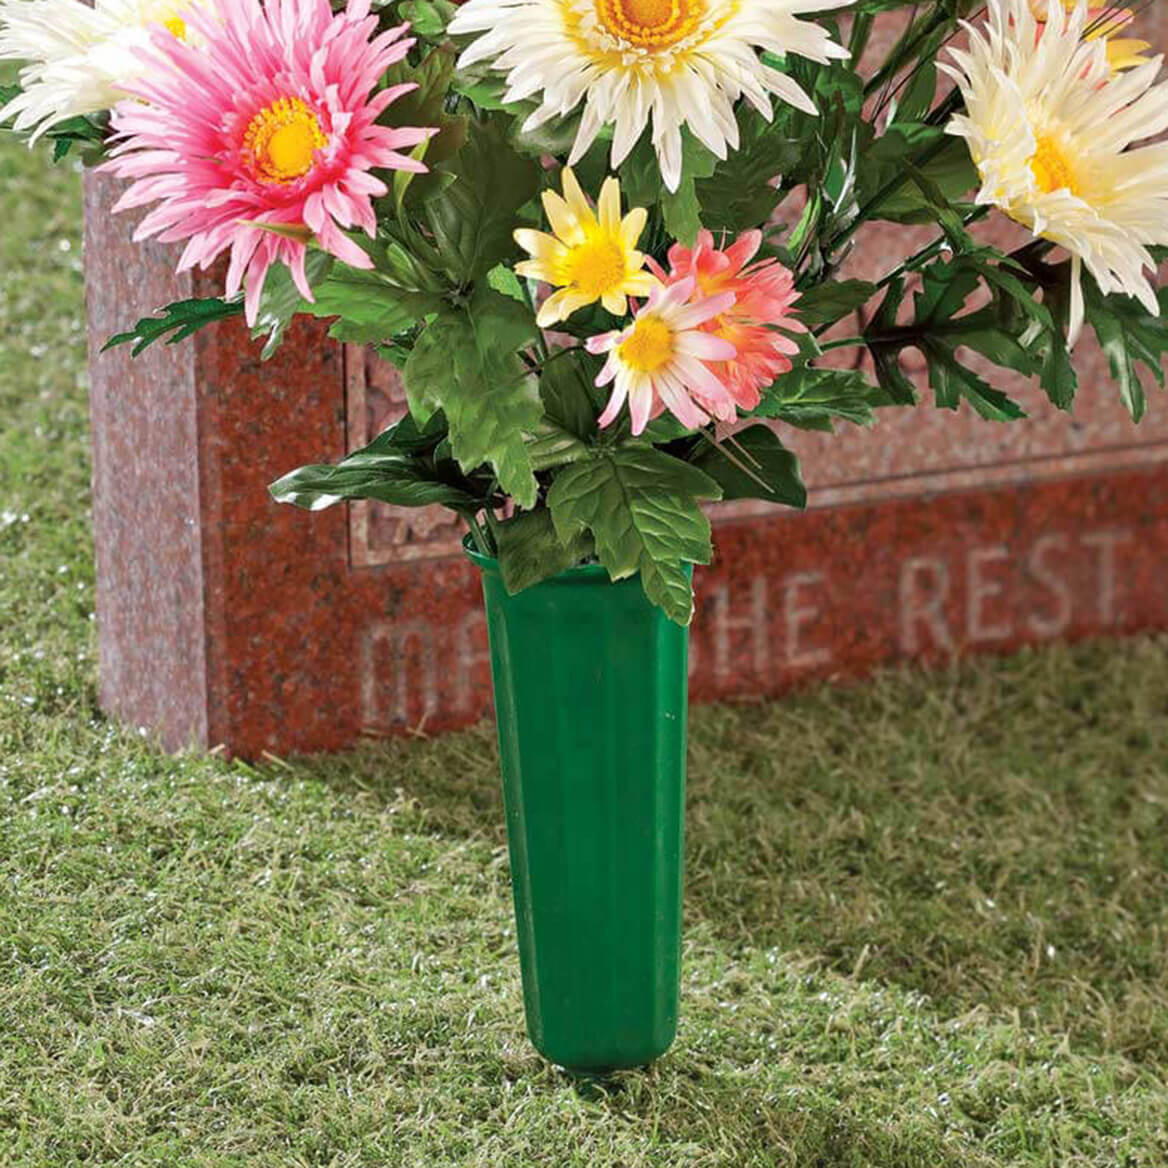 16 Famous Plastic Cemetery Vases with Stakes 10 2024 free download plastic cemetery vases with stakes 10 of memorial silk flowers memorial arrangements miles kimball with regard to cemetery vases set of 2 347071